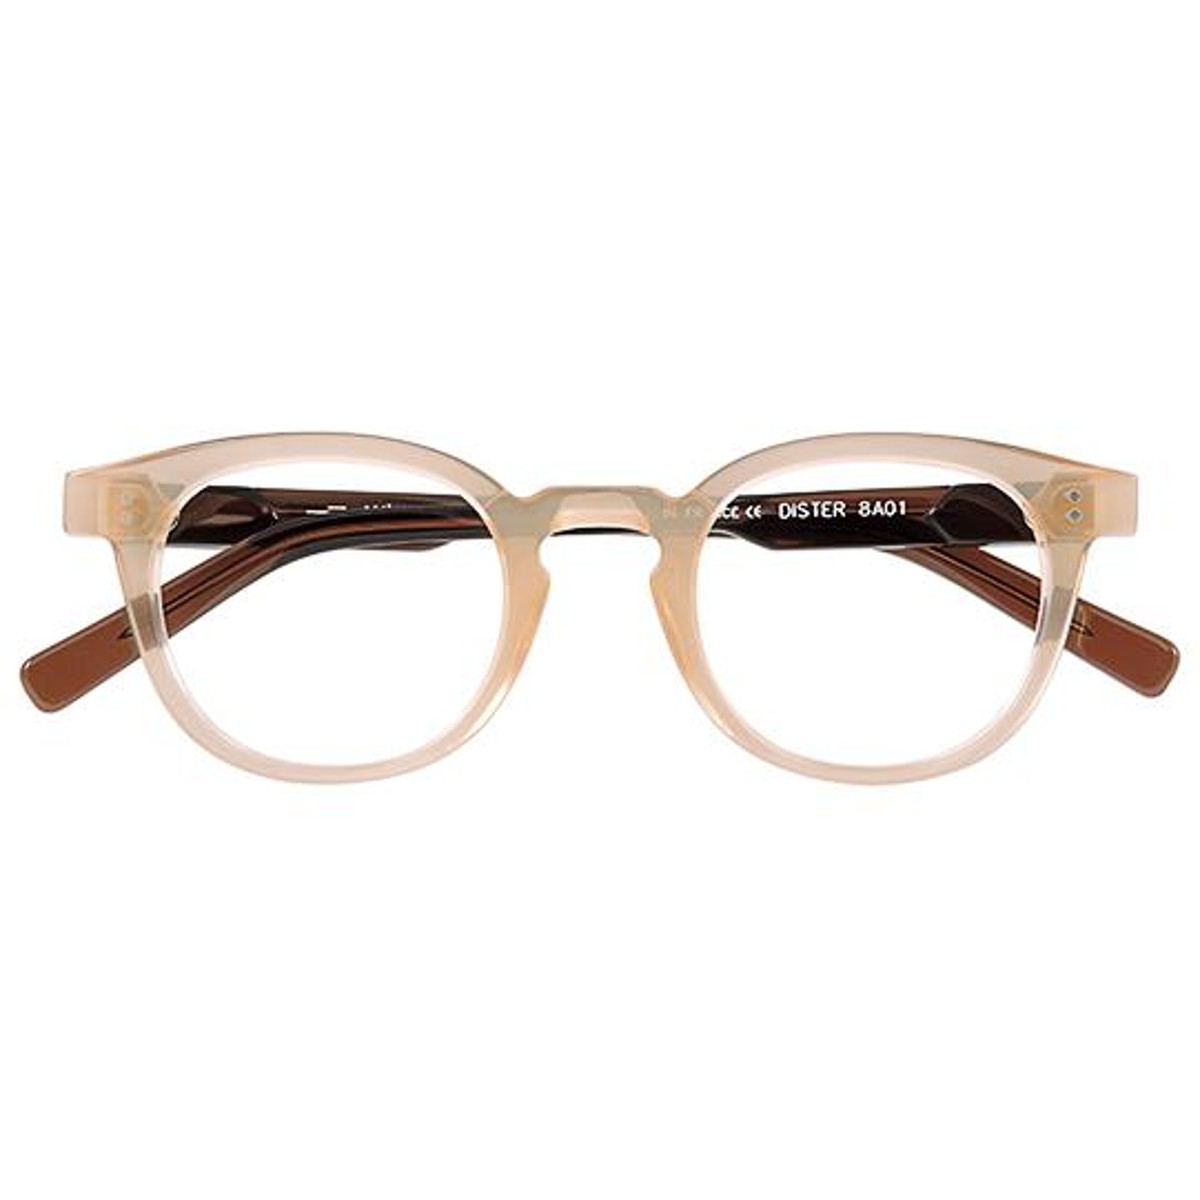 Anne et Valentin - Dister 8A01 Beige Clear with Brown